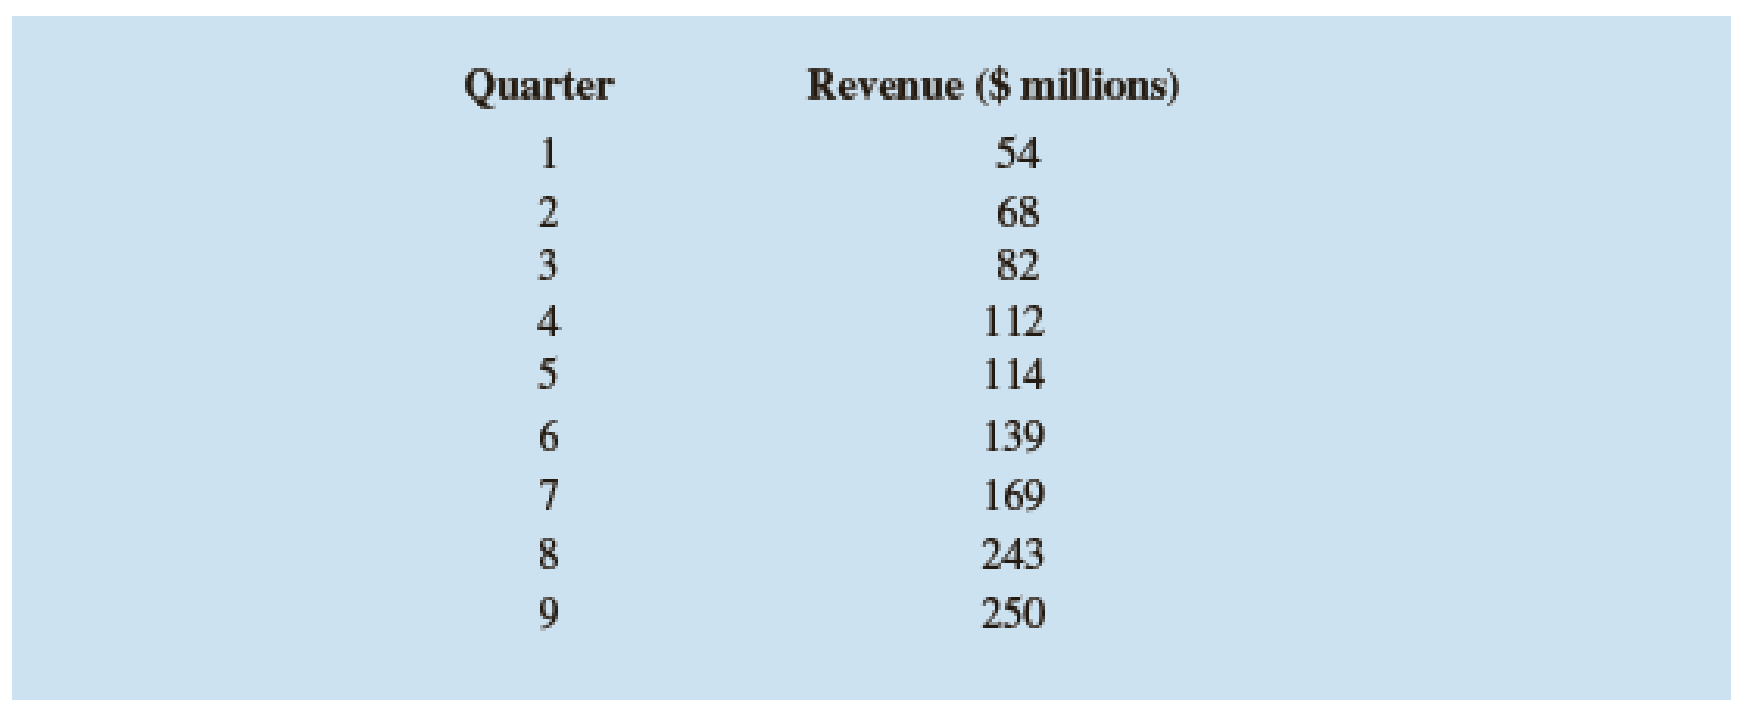 Chapter 17.4, Problem 25E, Quarterly revenue ($ millions) for Twitter for the first quarter of 2012 through the first quarter 